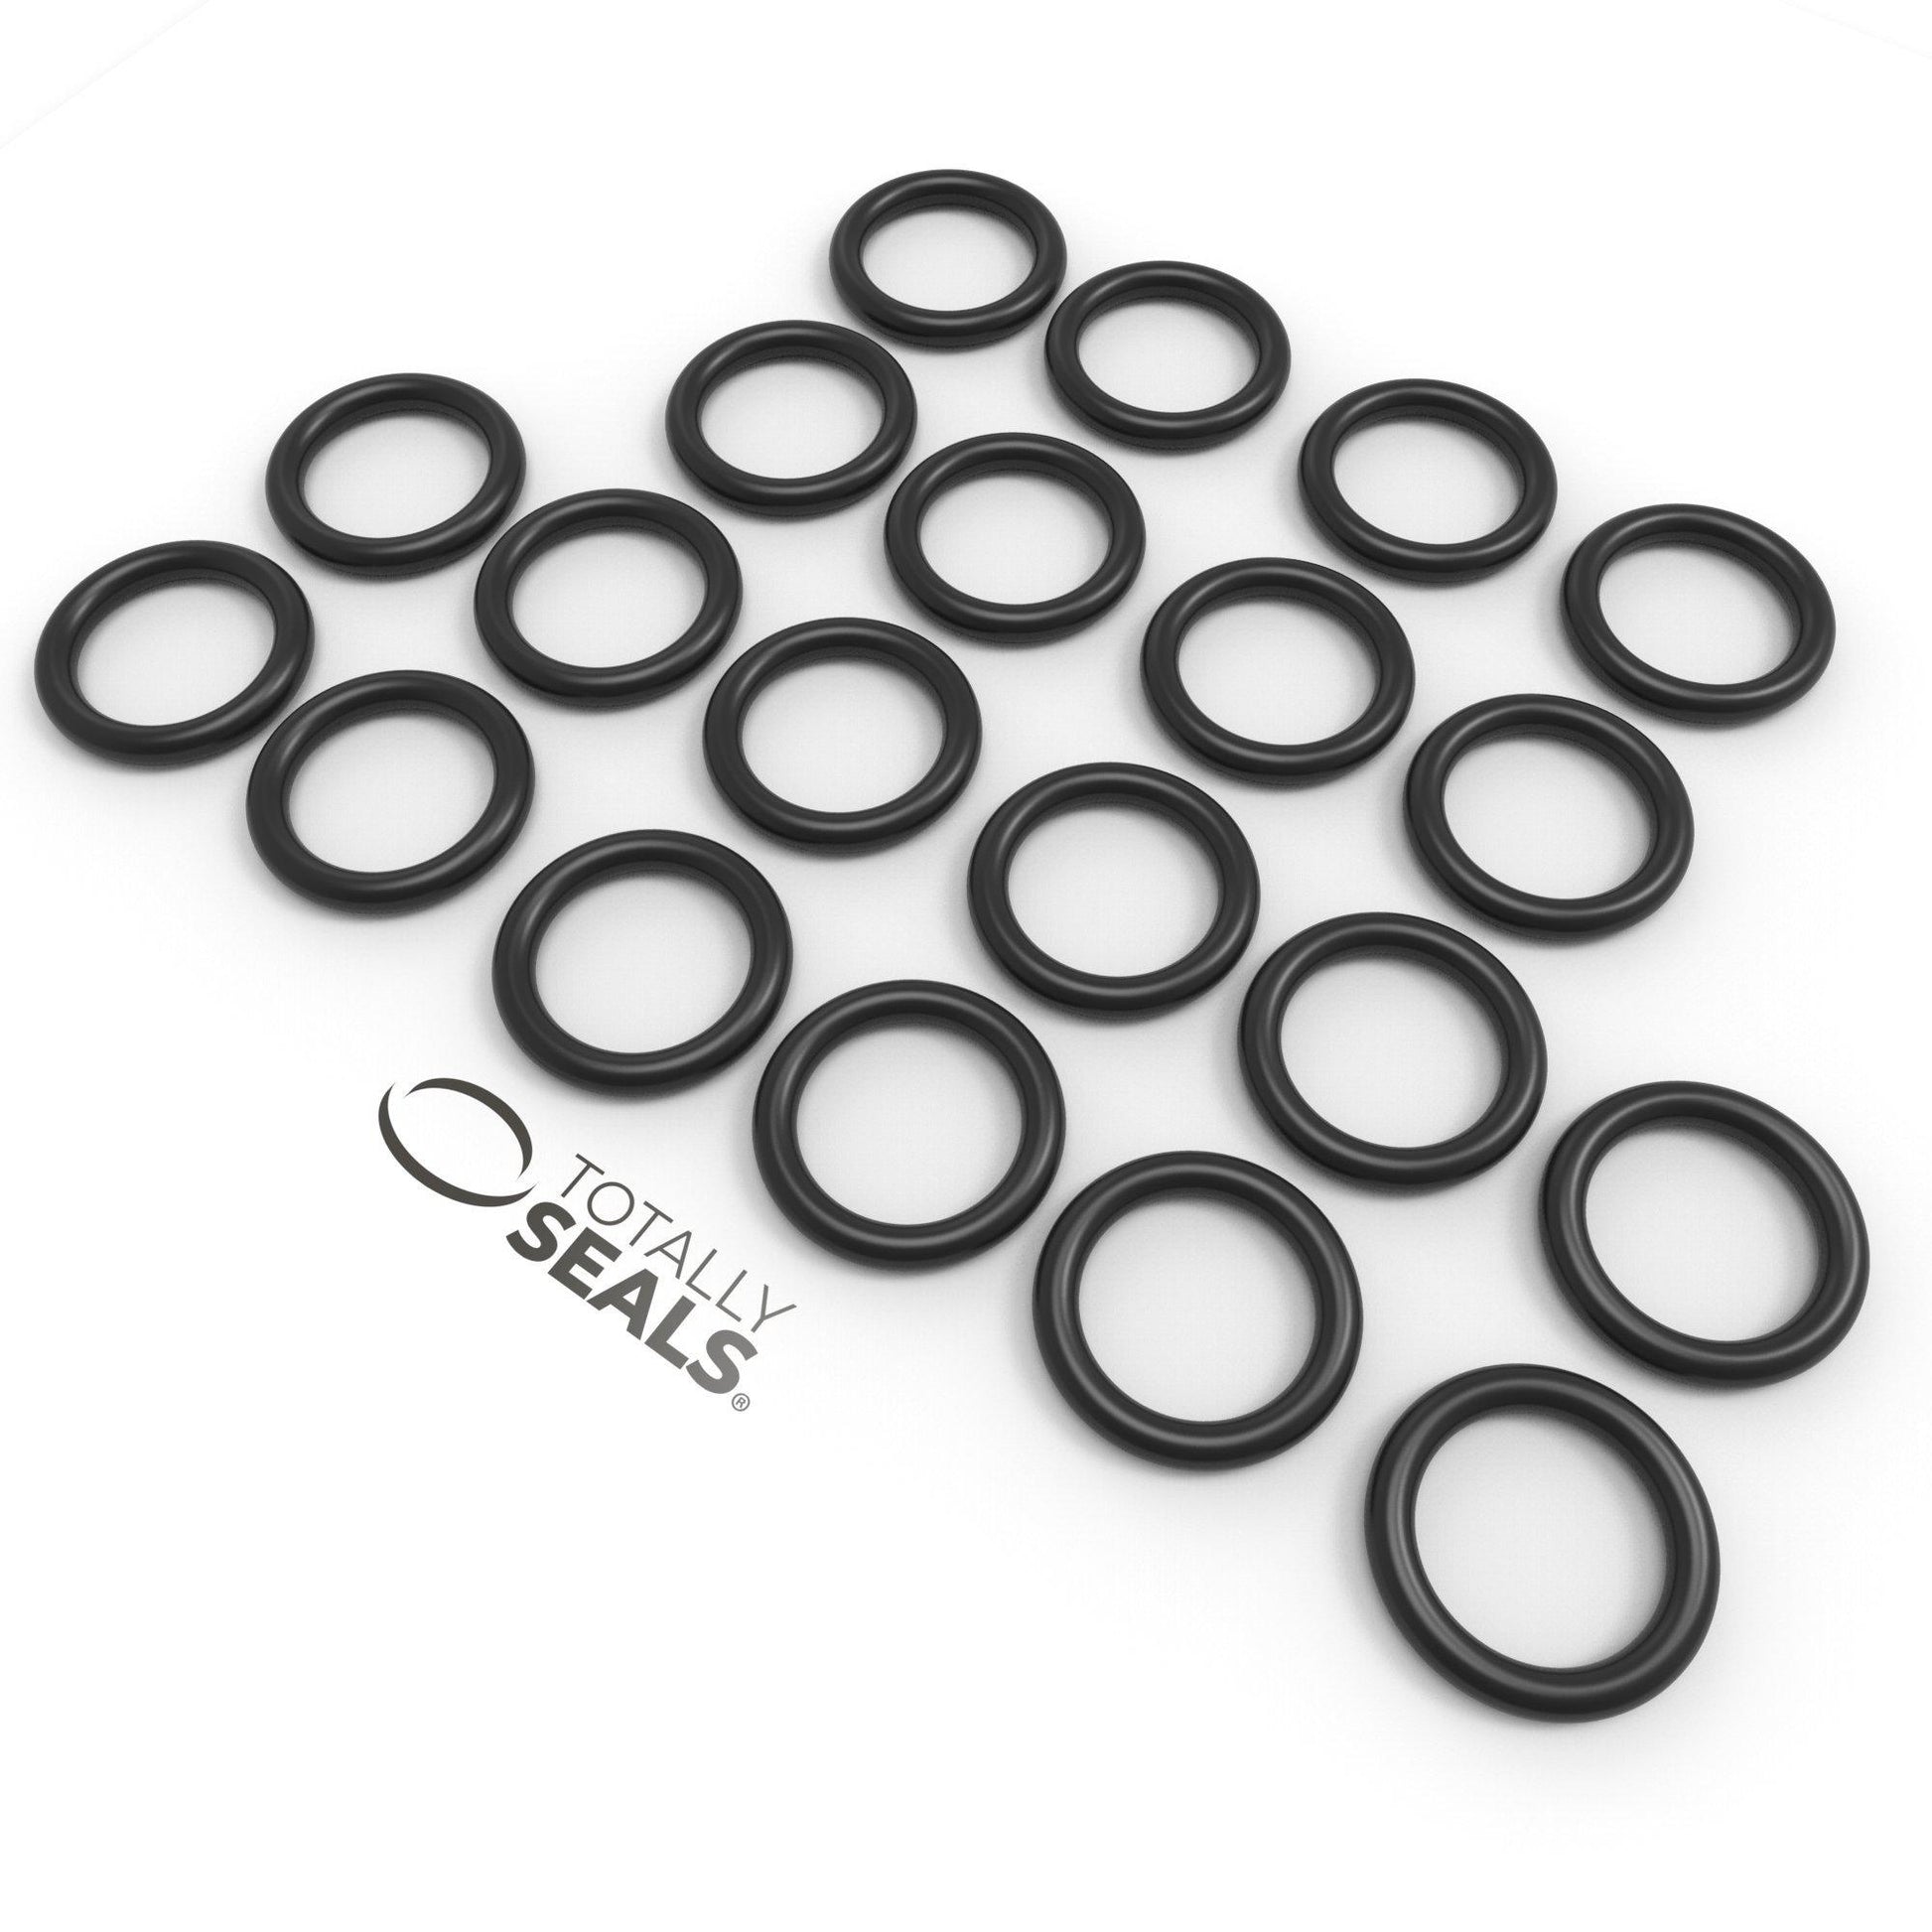 29mm x 1mm (31mm OD) Nitrile O-Rings - Totally Seals®